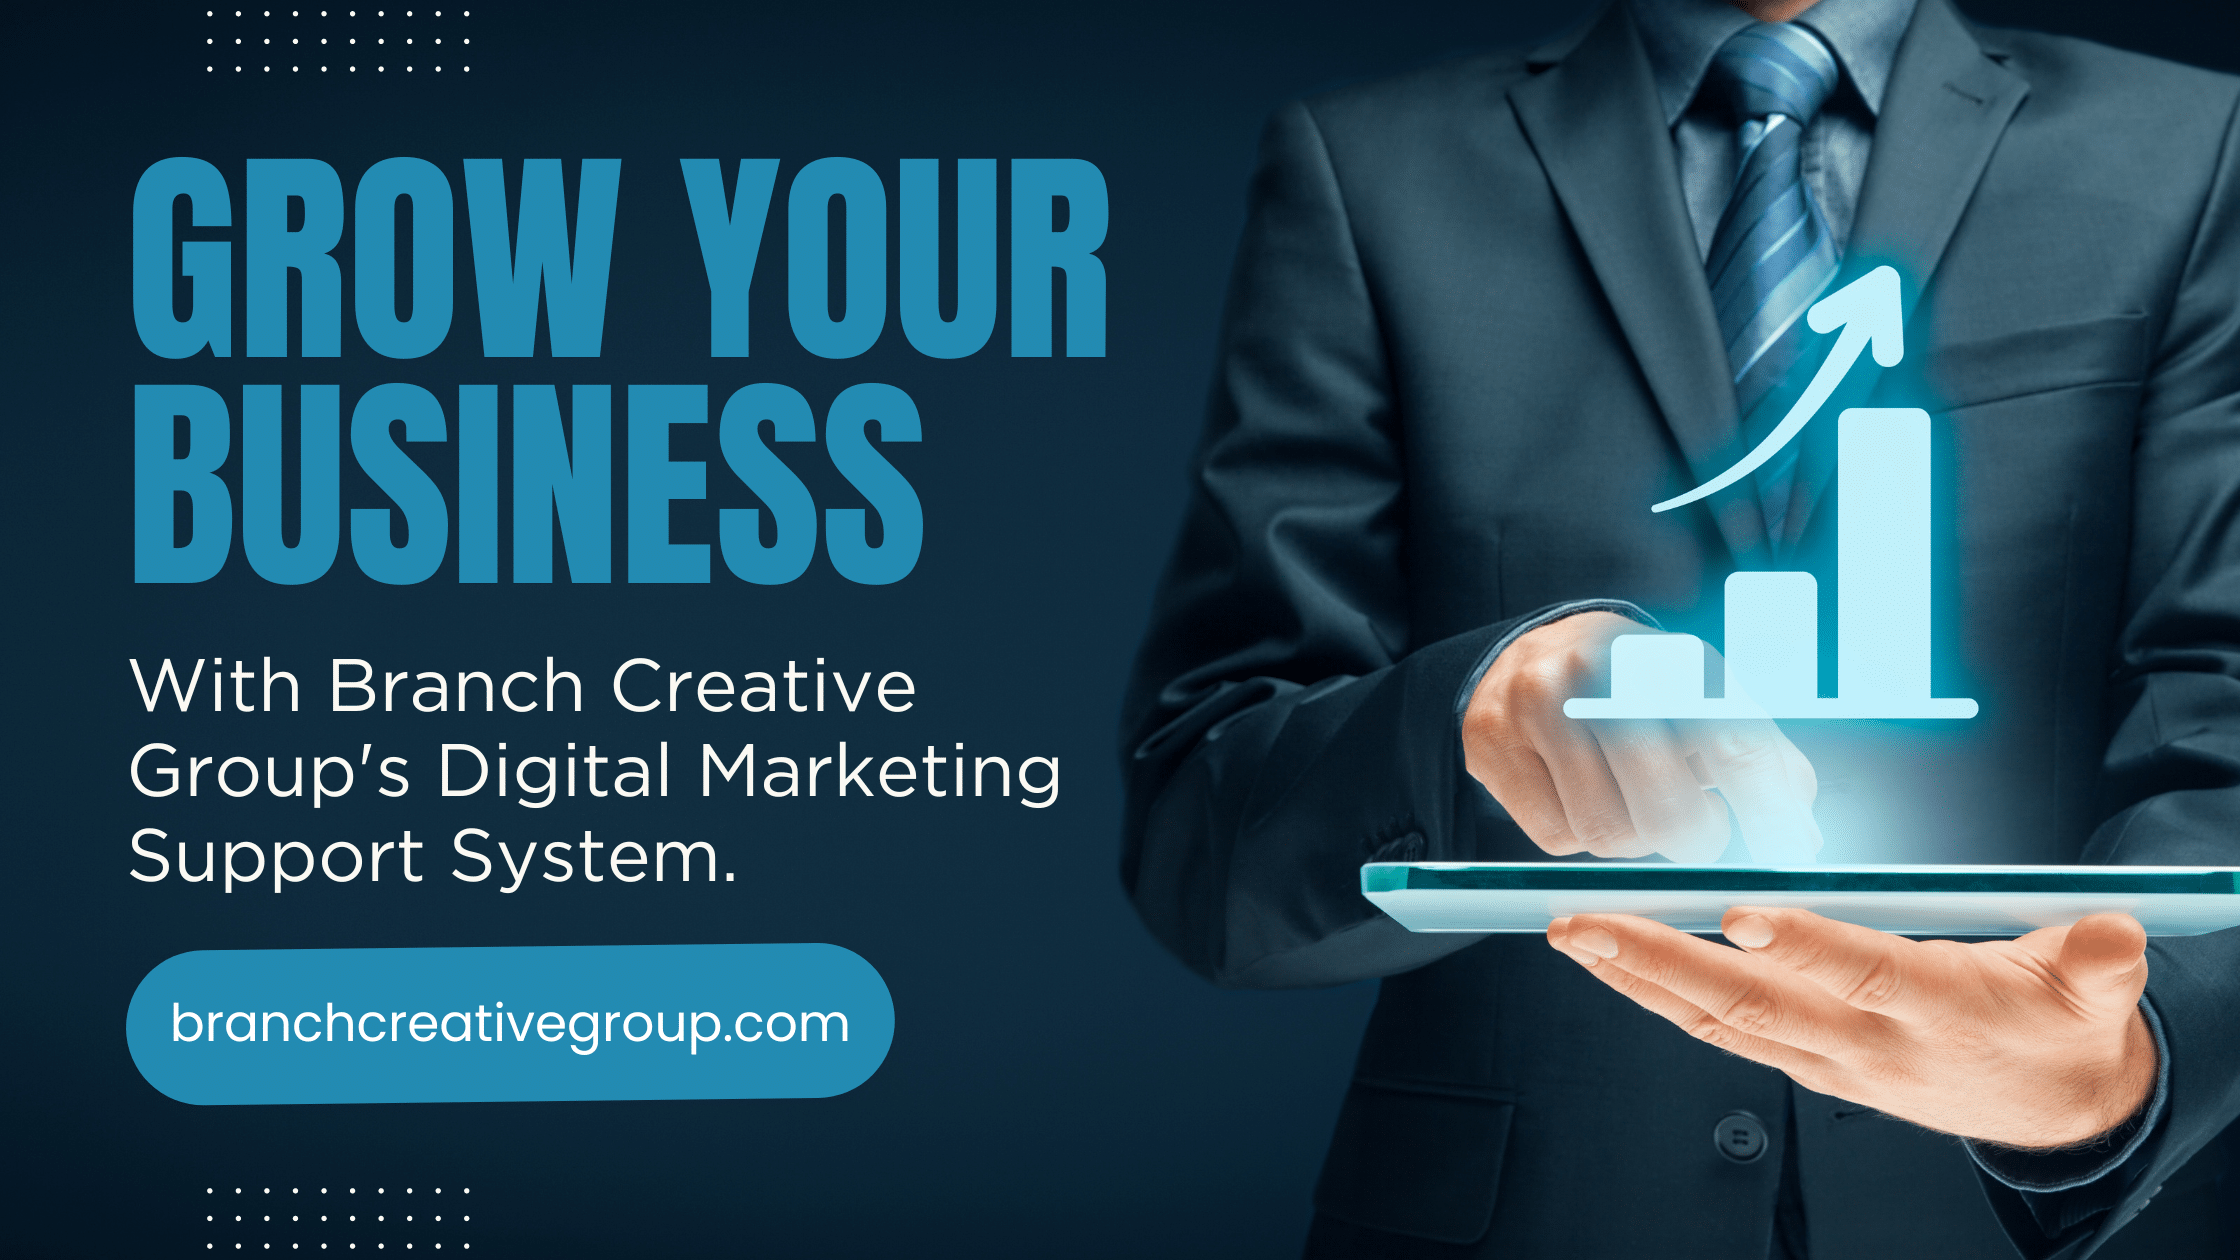 Grow your business with Branch Creative Group's Digital Marketing Support System